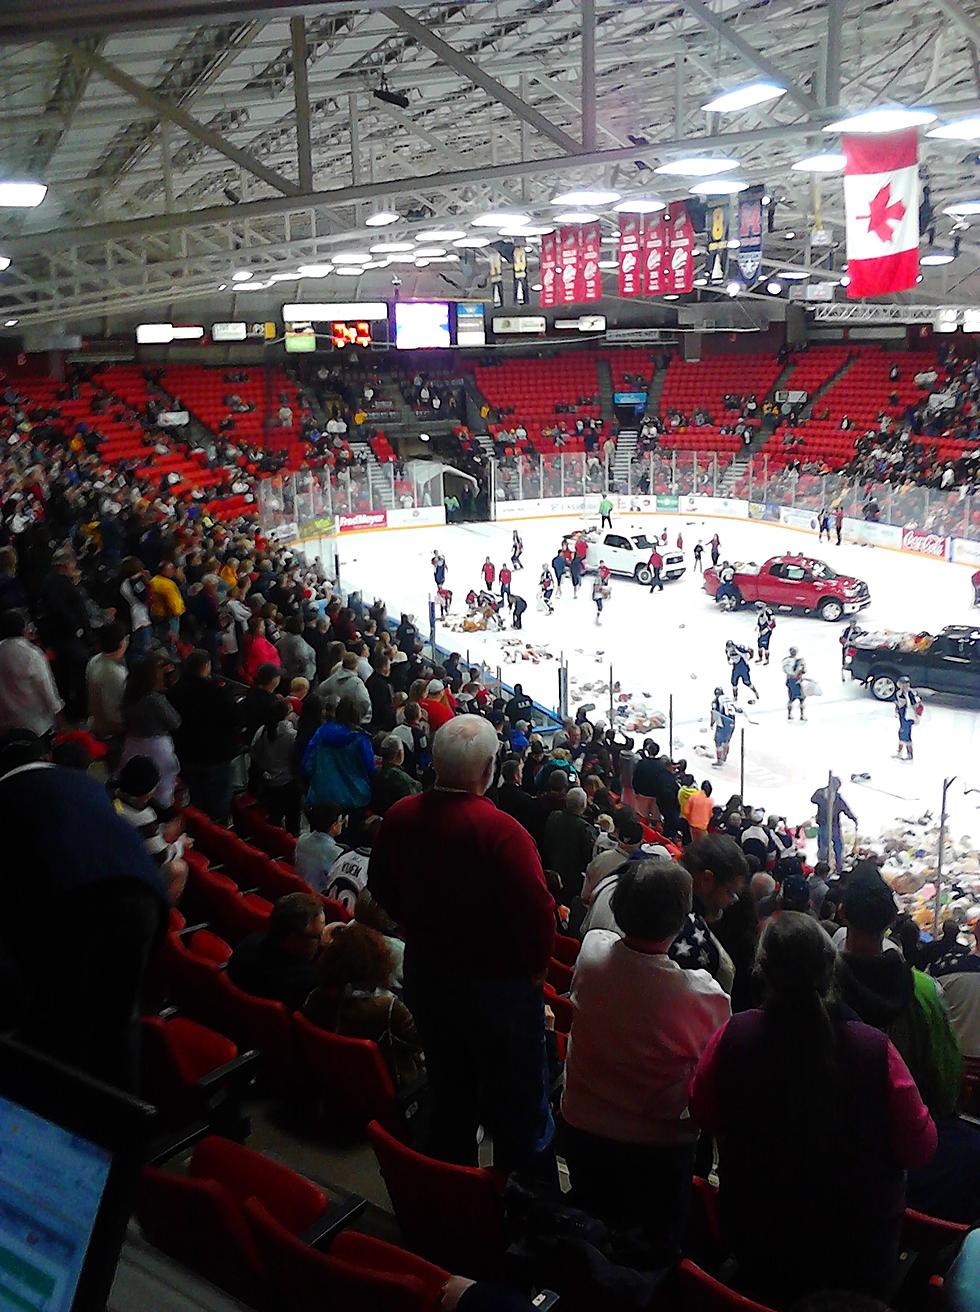 Over 2,600 Stuffed Animals ‘Iced’ During the Tri-City Americans Teddy Bear Toss!